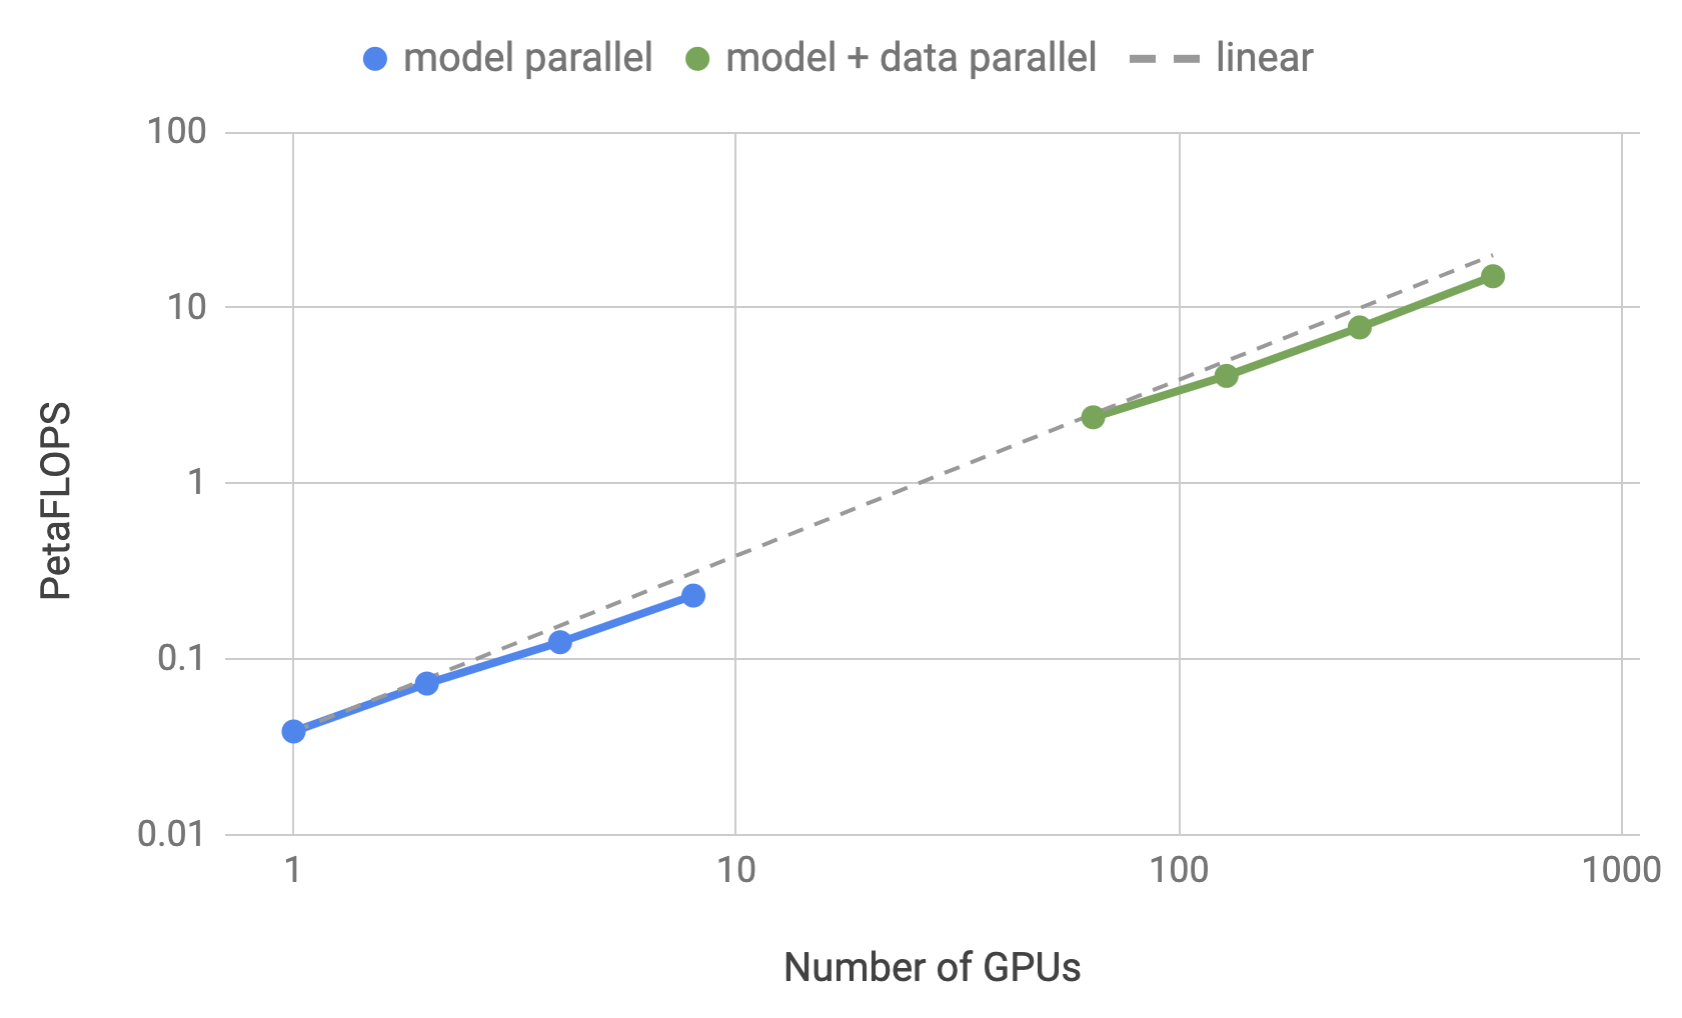 Figure 6 - Training efficiency for tensor parallelism and a combination of tensor parallelism with data parallelism as a function of the number of GPUs